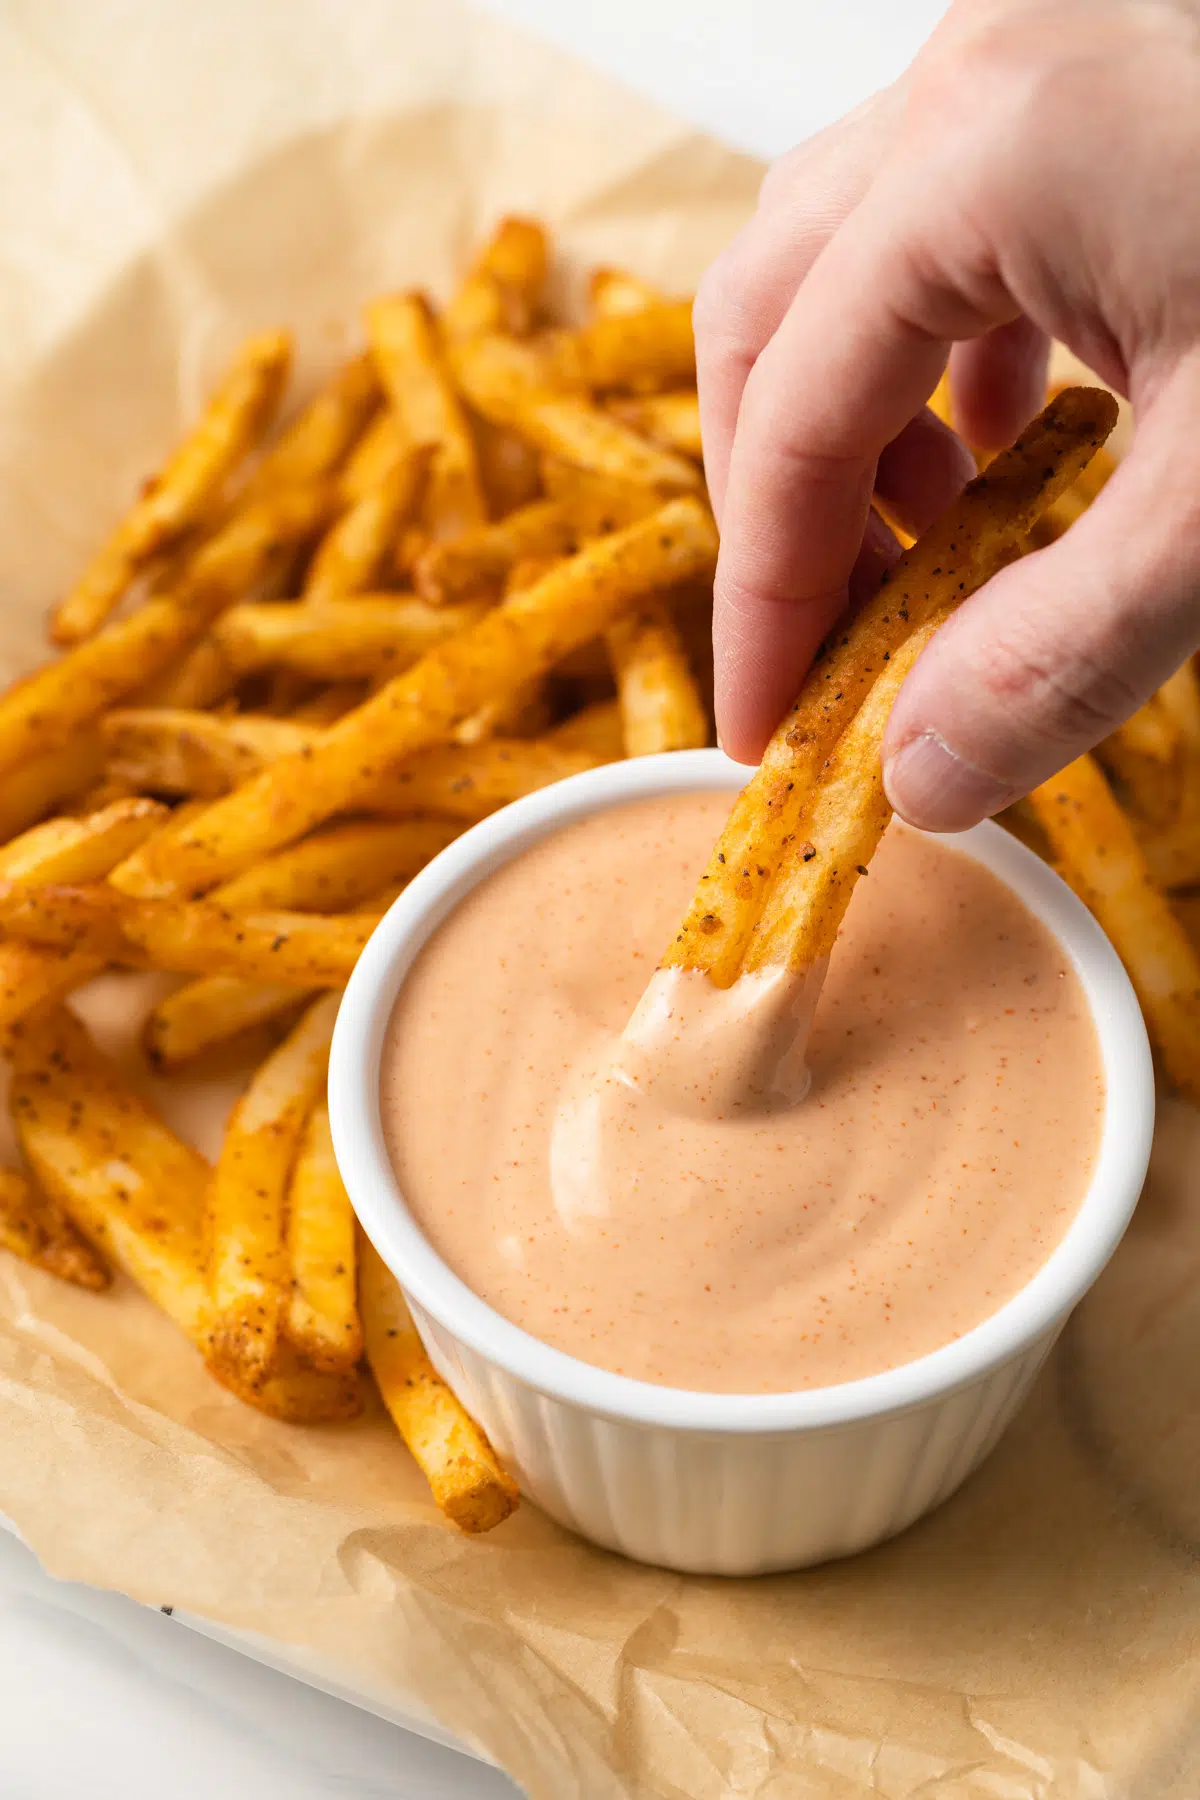 French fries dipped in French fry sauce.